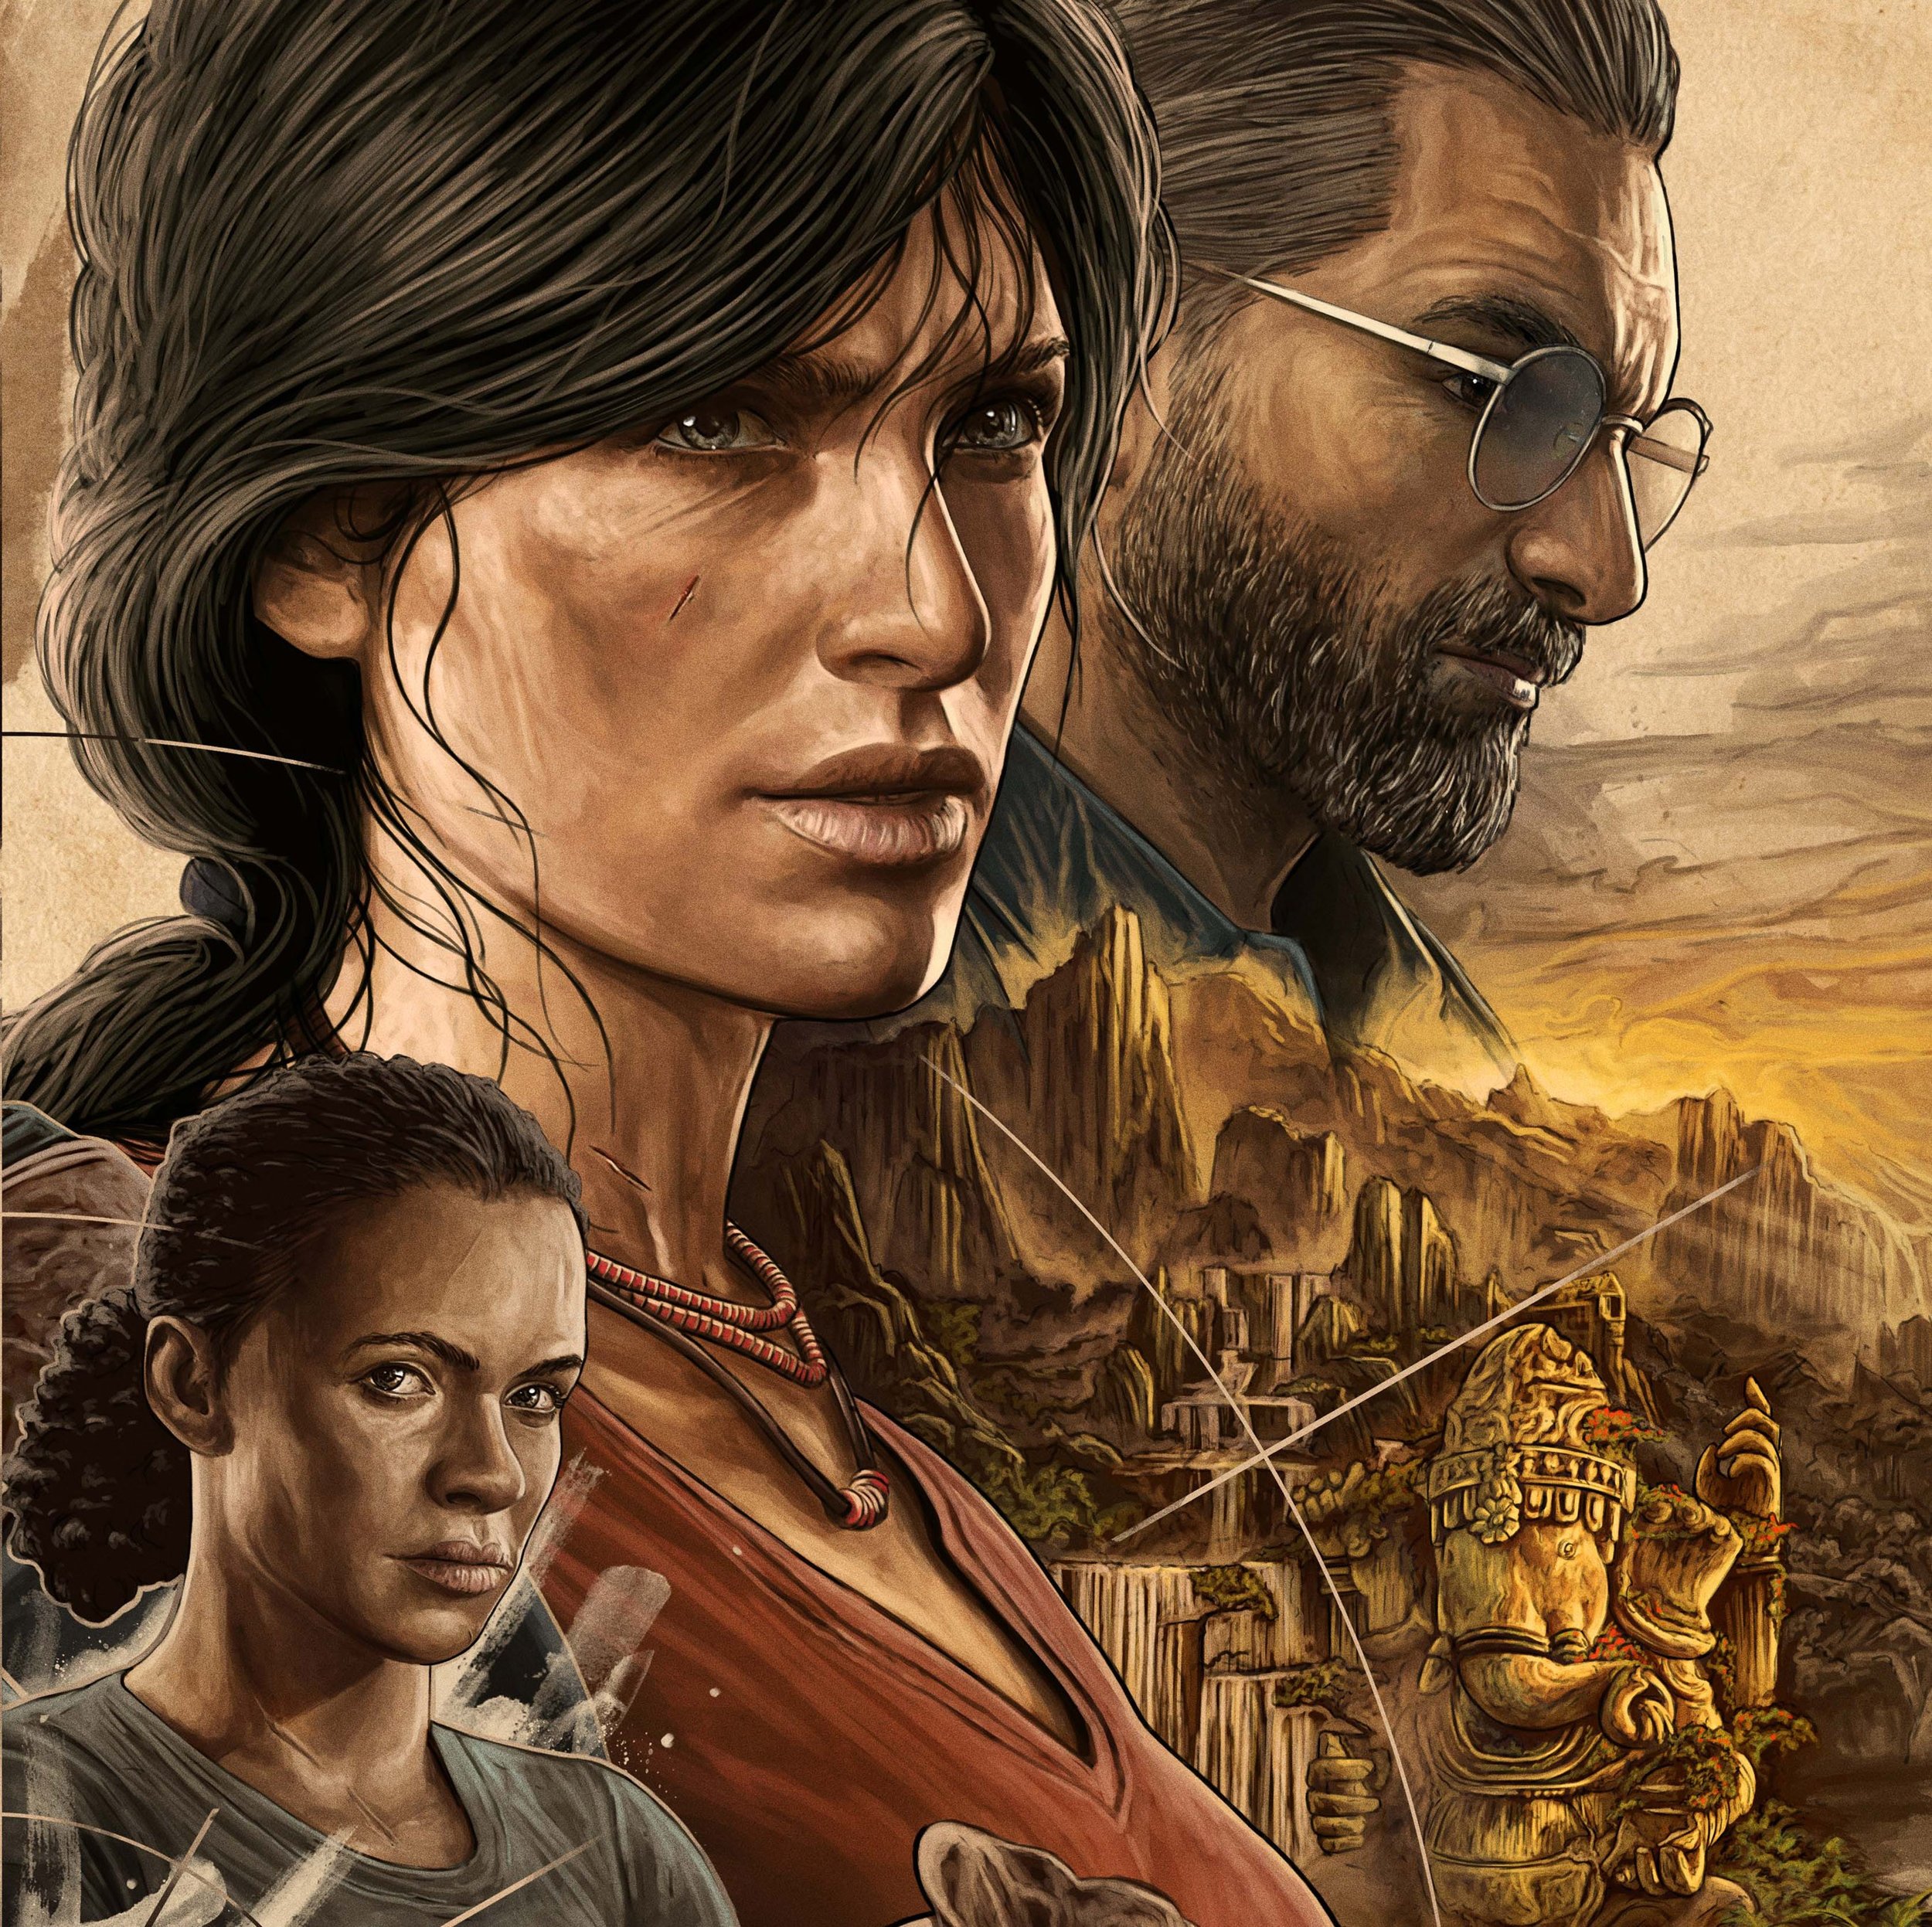 Uncharted Naughty Dog Legacy Collection PS5 FAN ART COVER ツ : r